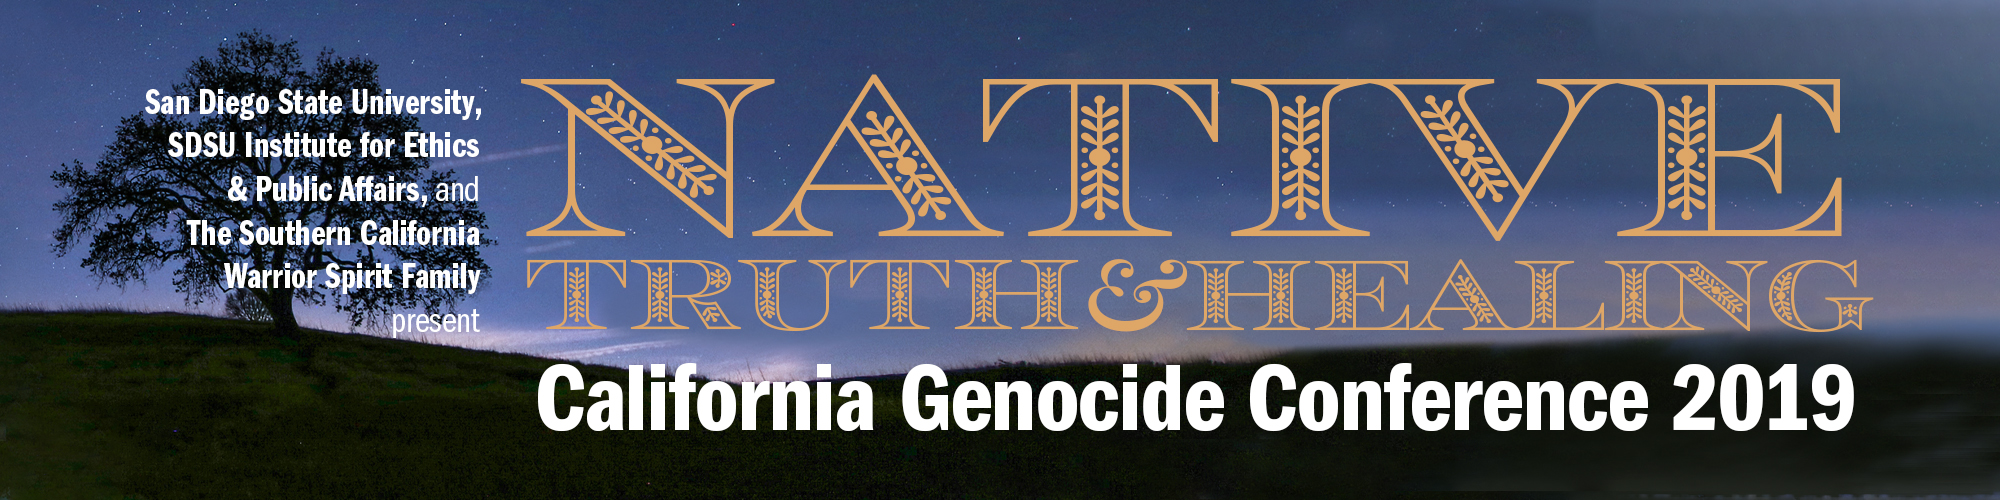 The Southern California Warrior Spirit Family and San Diego State University present Native Truths and Healing: California Genocide Conference 2019